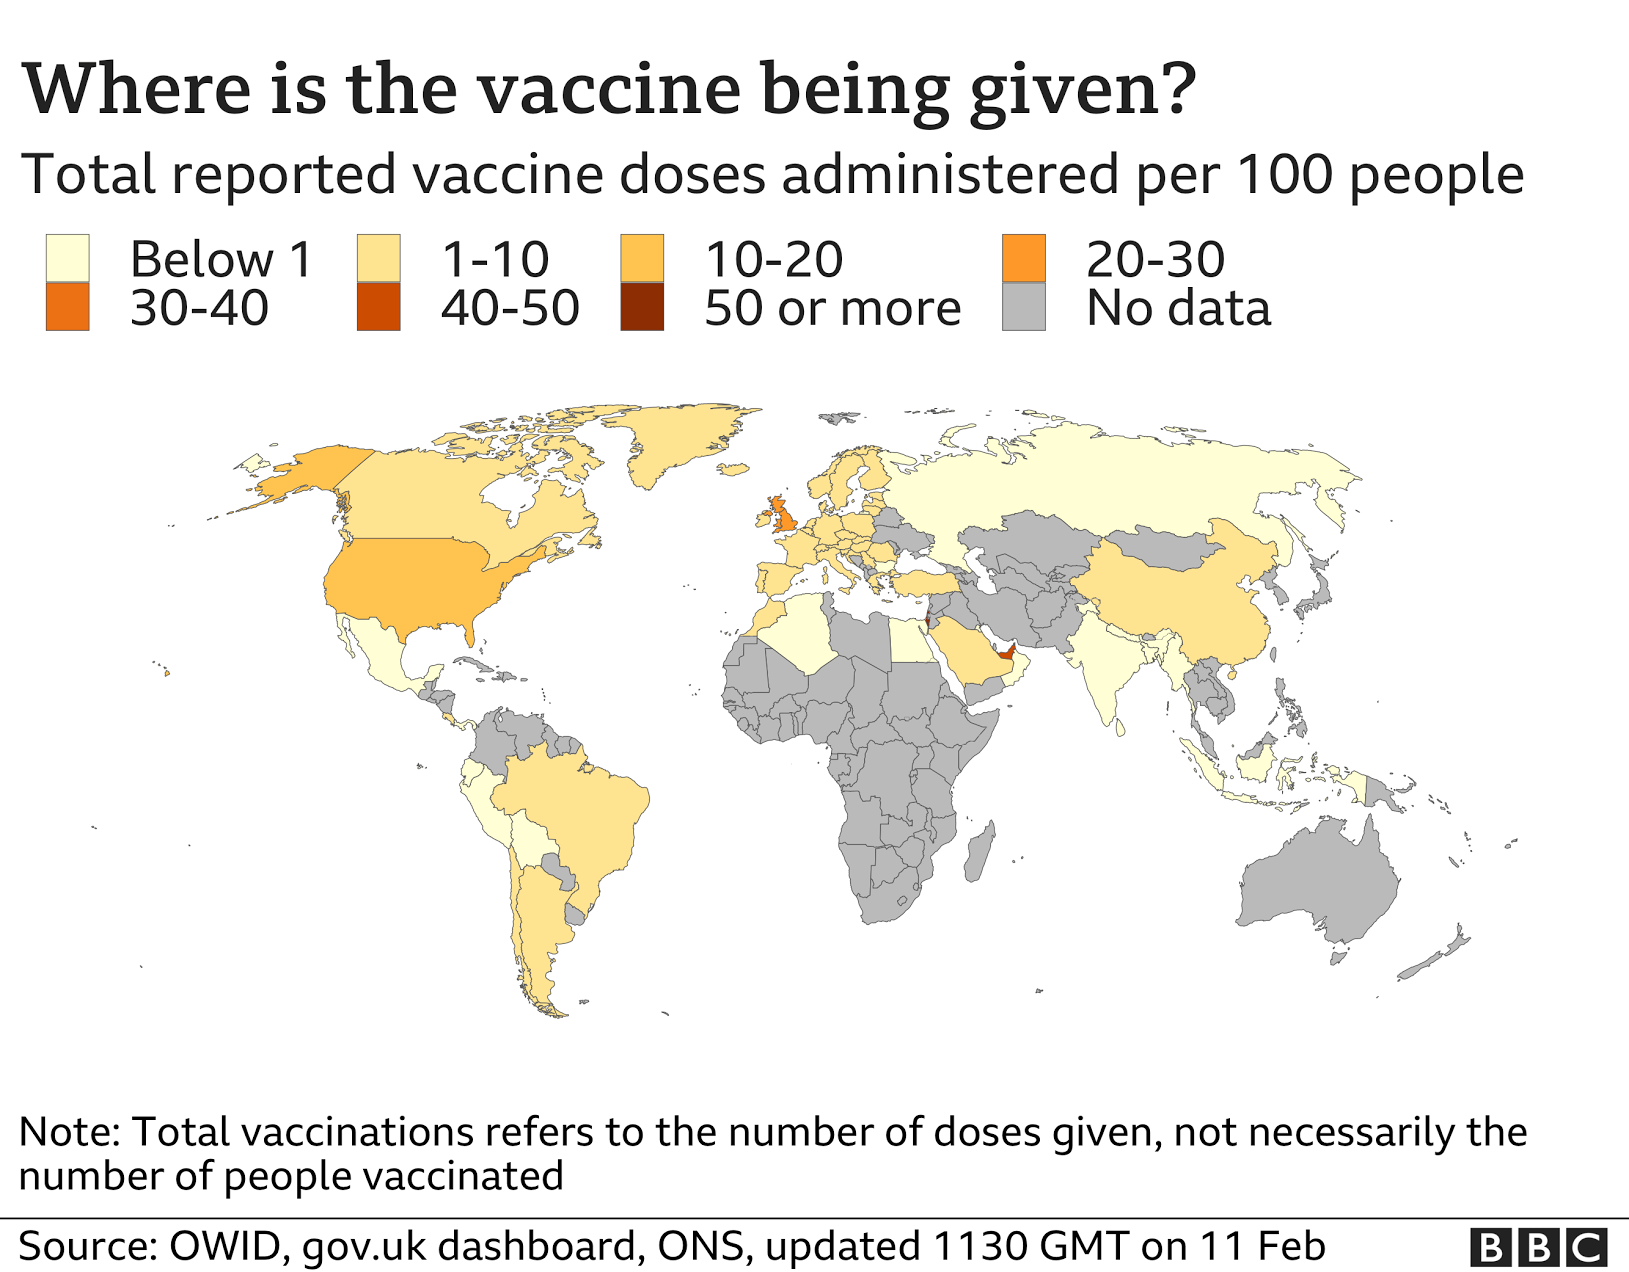 _116913641_vaccine_rate_map_11feb-nc.png